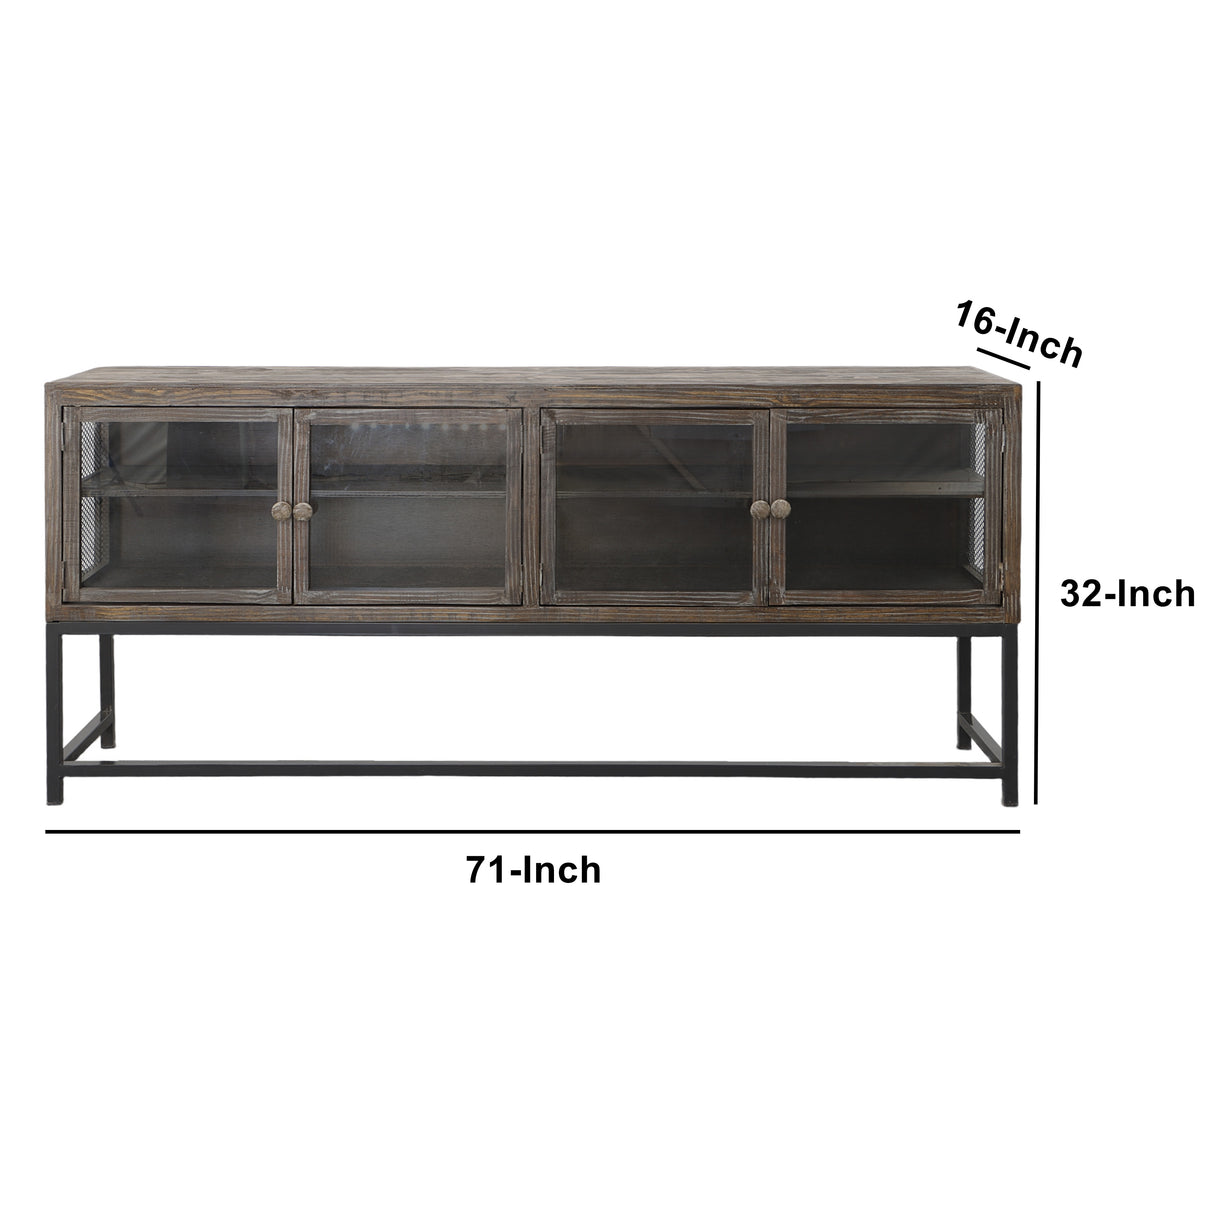 71 Inch Rustic Media Console TV Stand, 4 Glass Panel Doors, Solid Wood, Metal Frame, Brown and Black Home Elegance USA